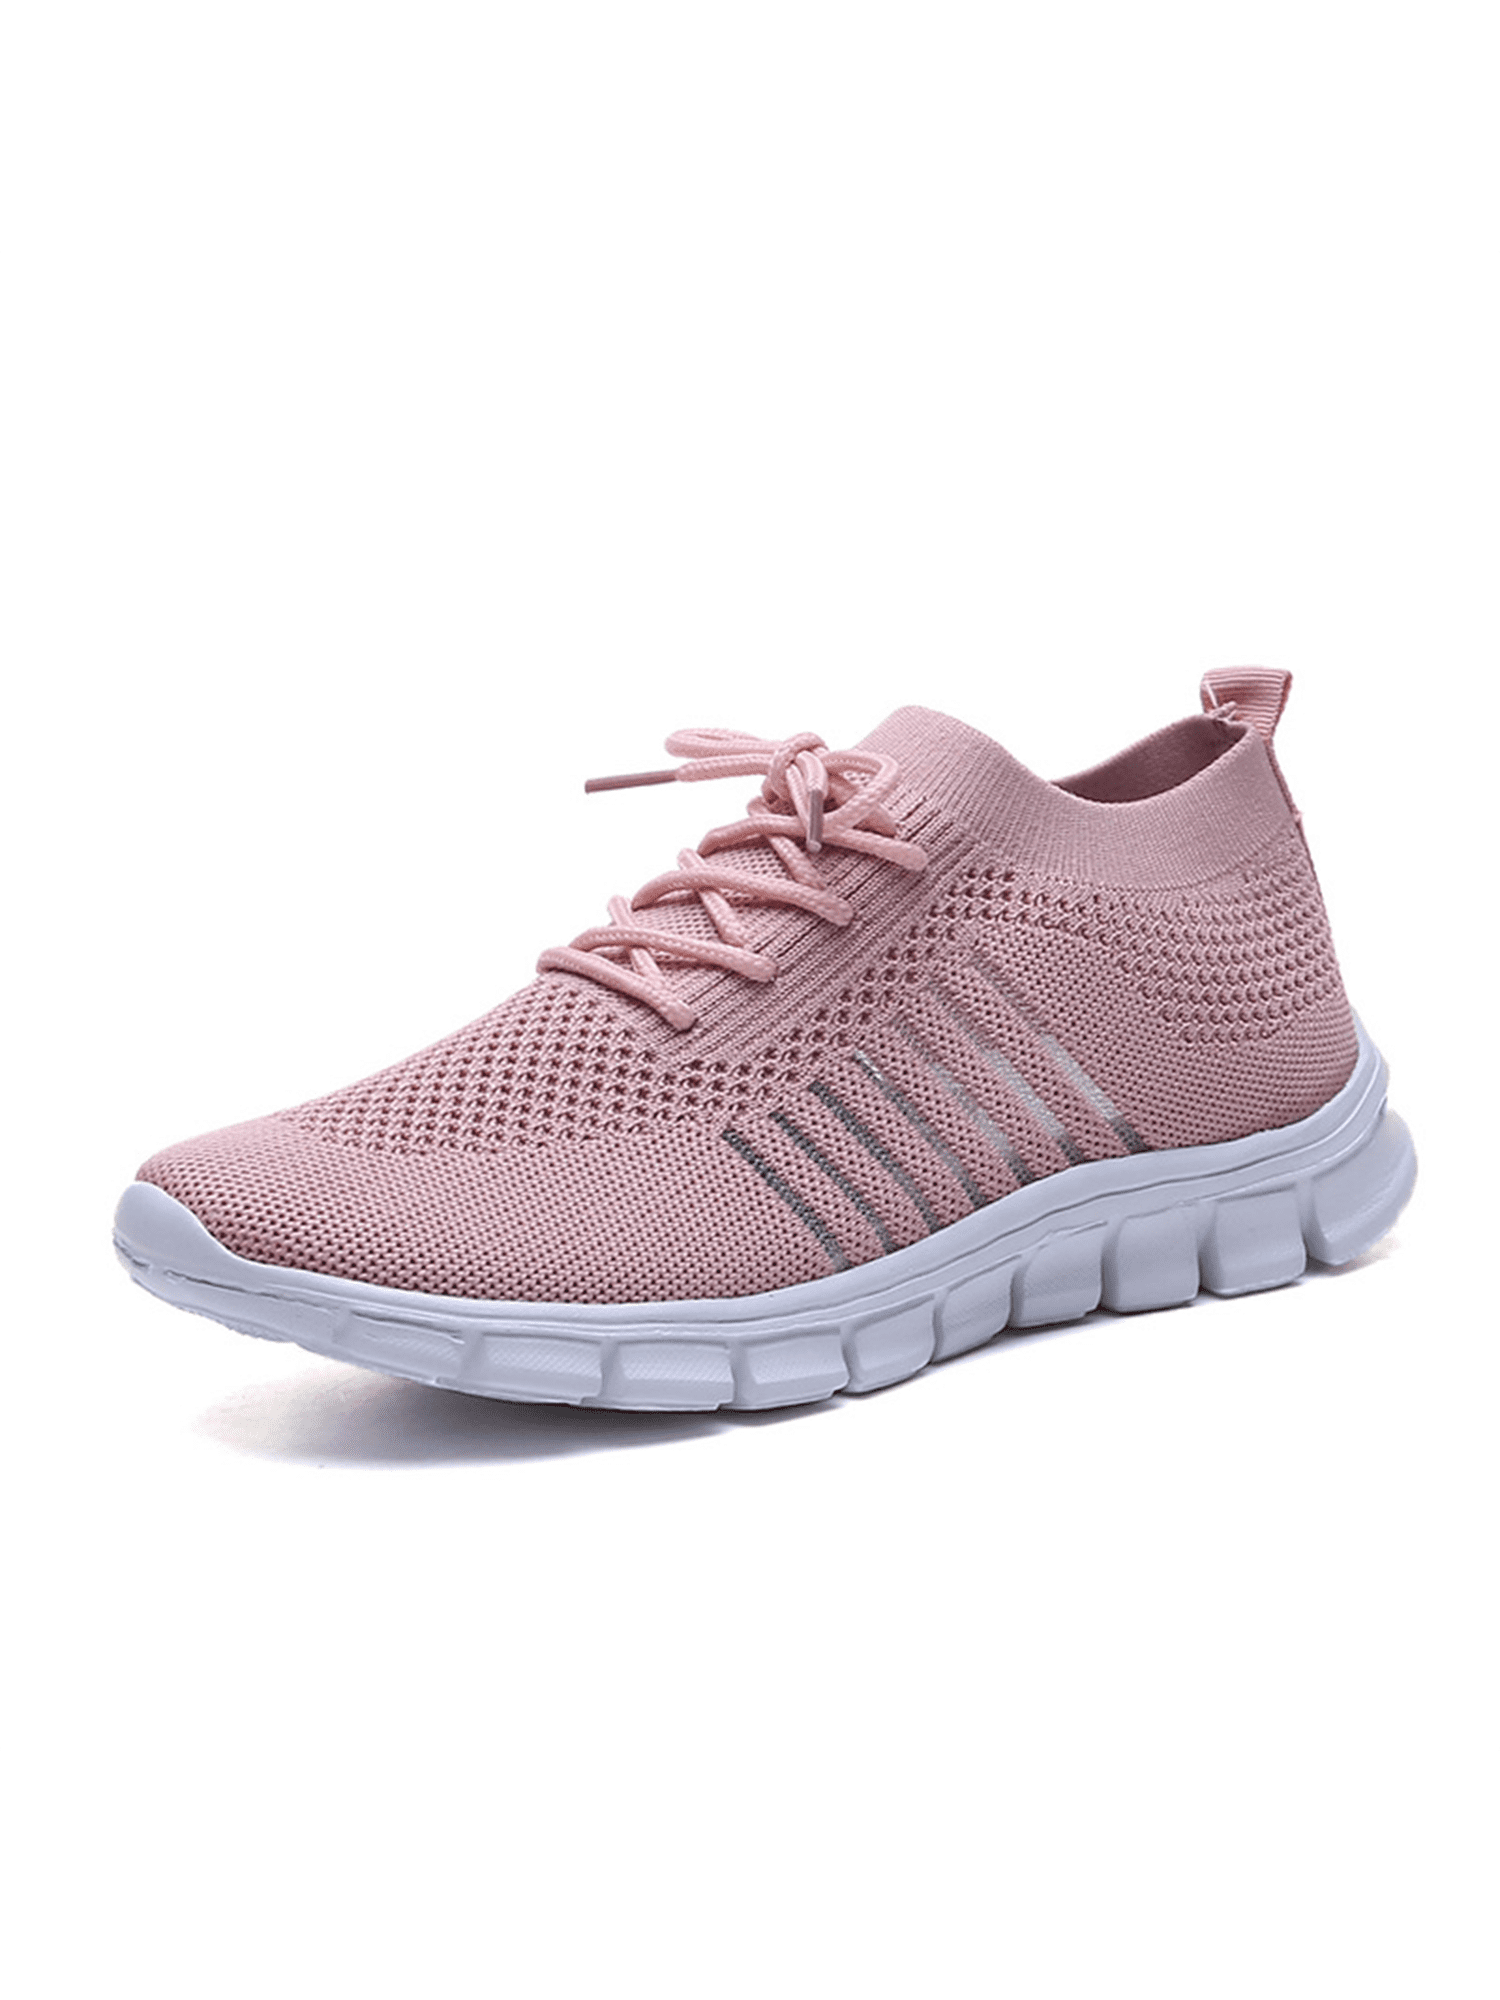 Menshoes Mens and Womens Athletic Sneakers Casual Style Summer Mesh Breathable Flying Weave A Couple of Running Sneaker Comfortable lydianzishangwu